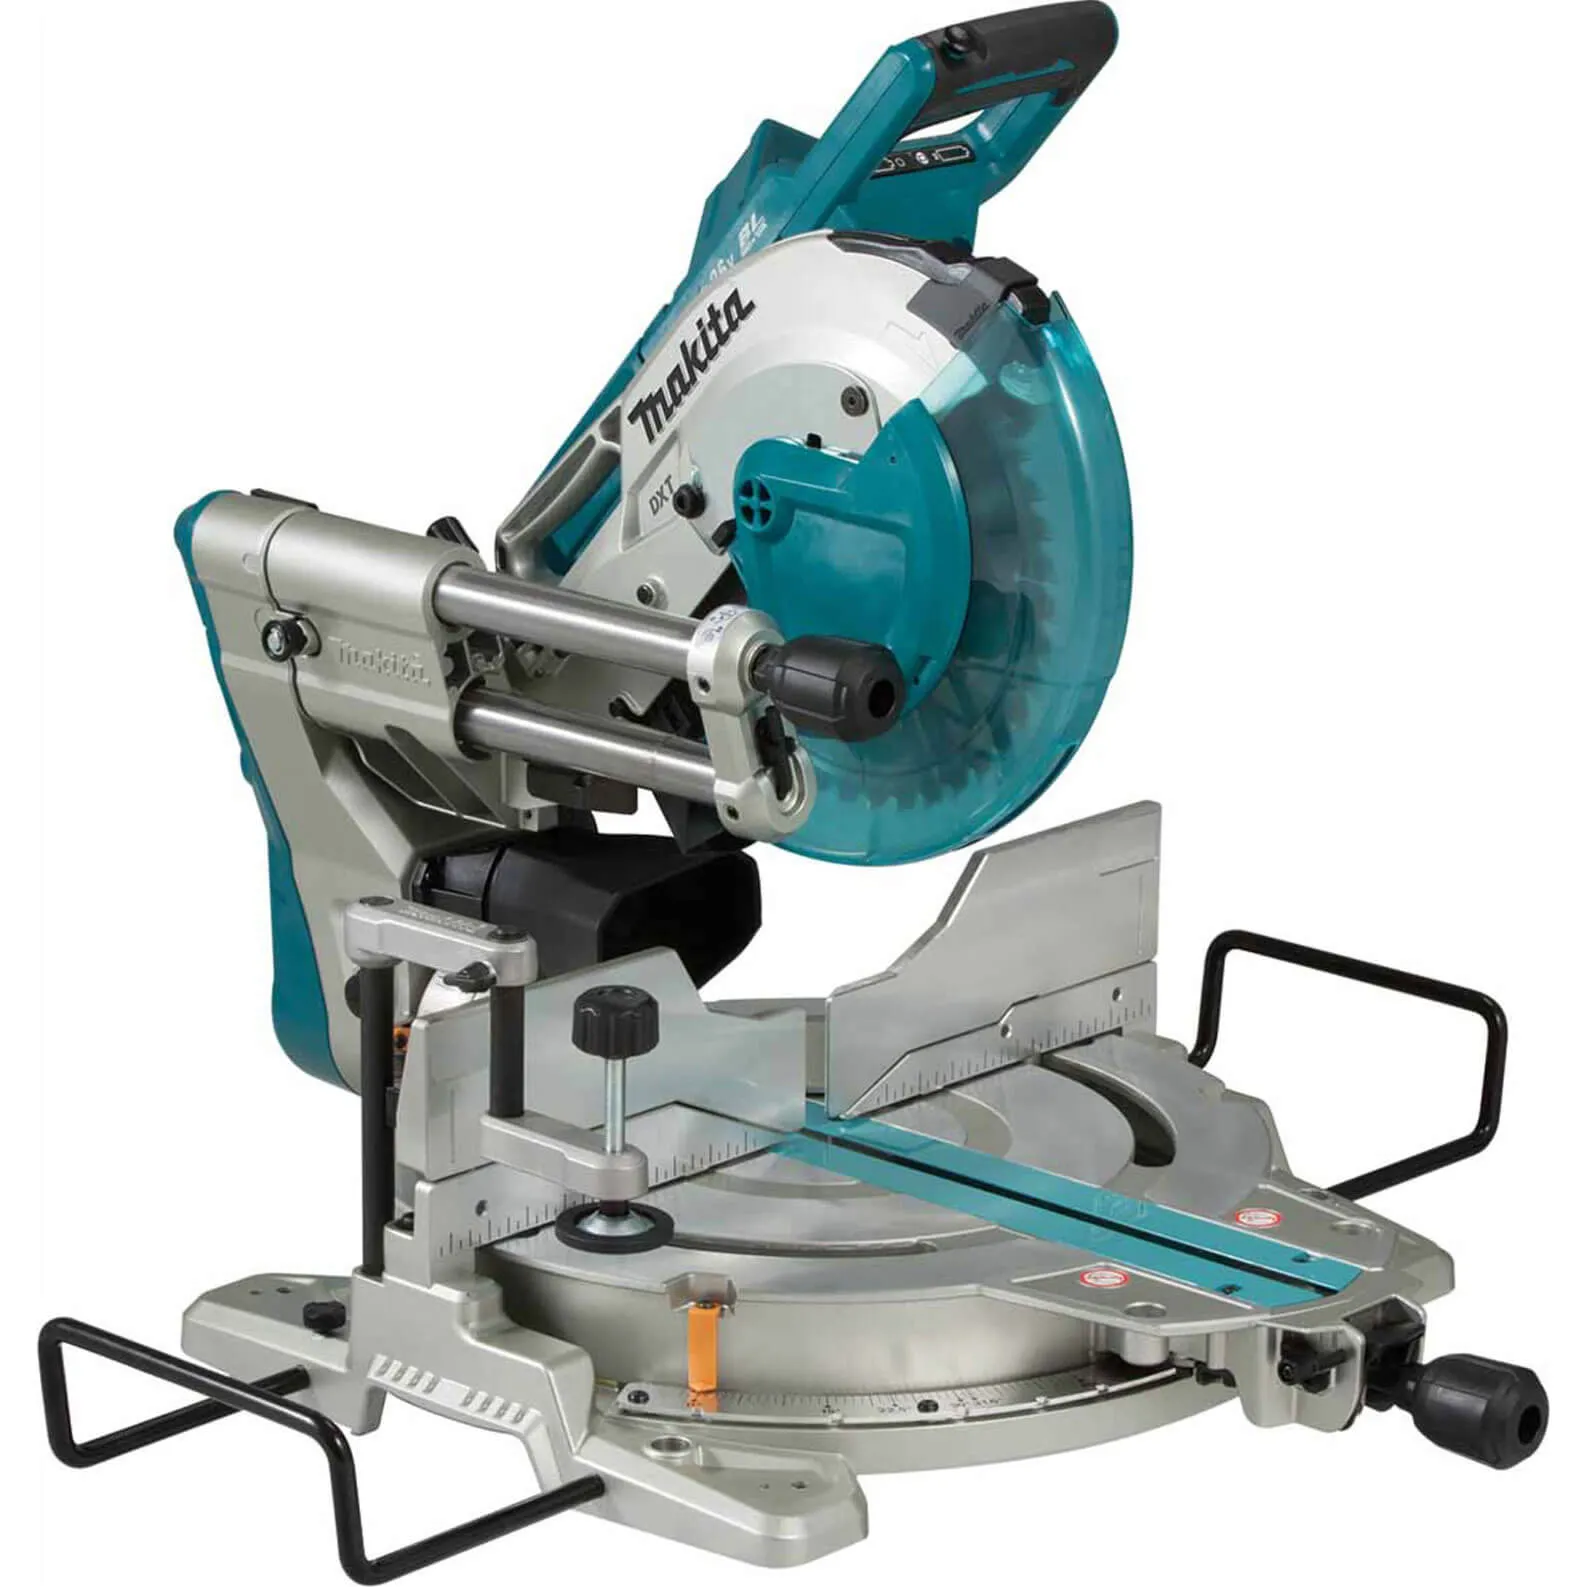 Makita DLS110 Twin 18v LXT Cordless Brushless Mitre Saw 260mm - No Batteries, No Charger, No Case